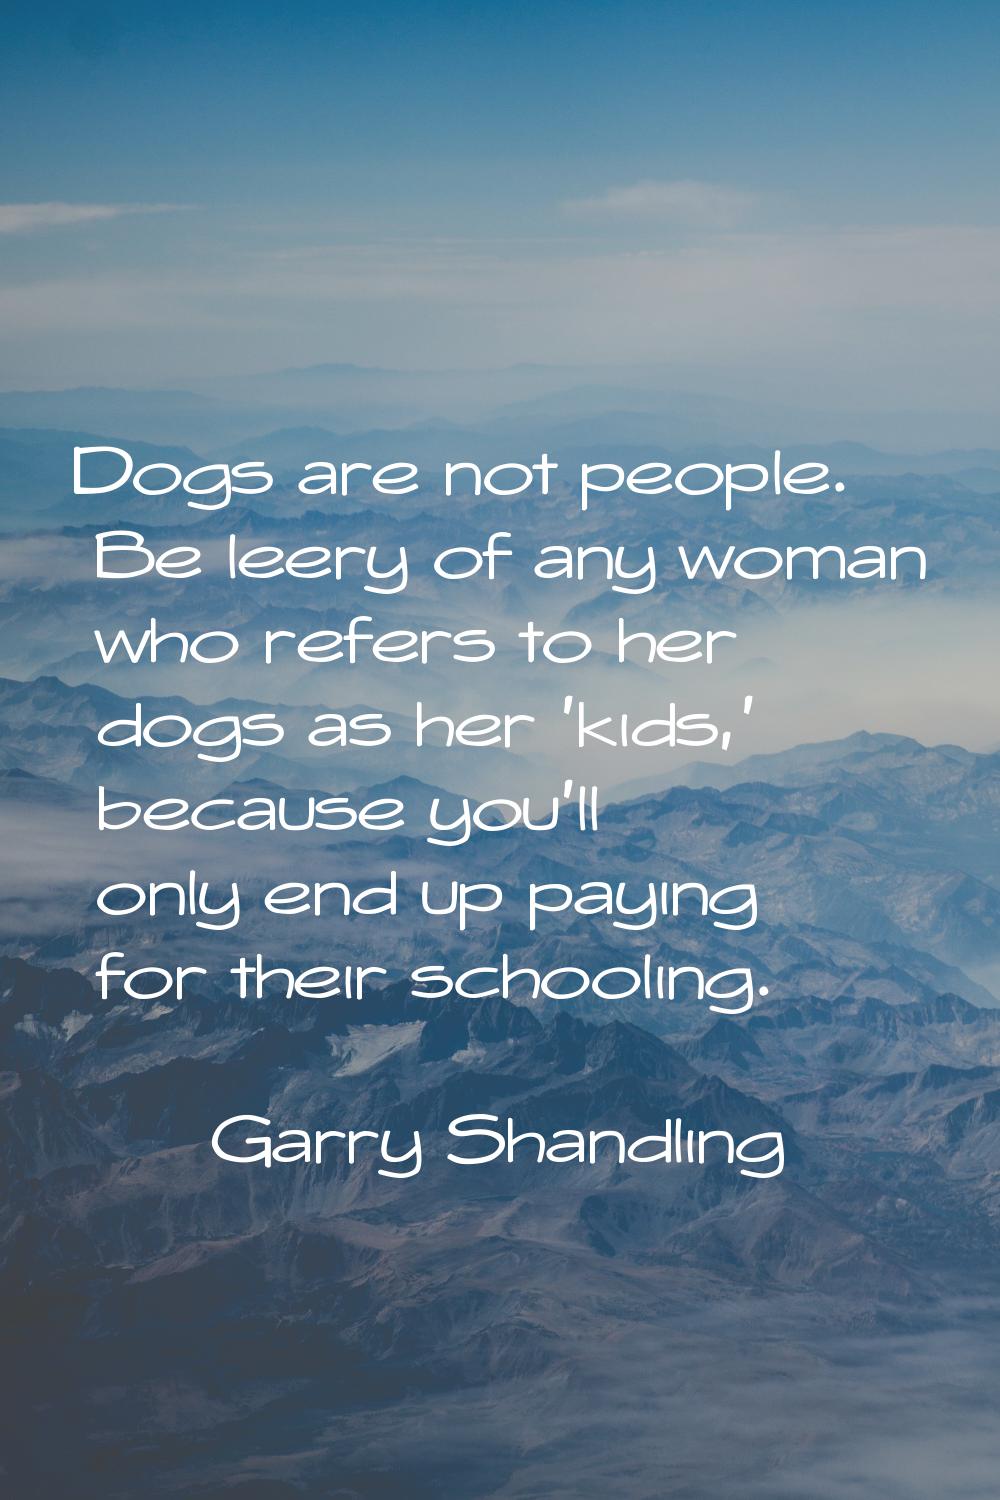 Dogs are not people. Be leery of any woman who refers to her dogs as her 'kids,' because you'll onl